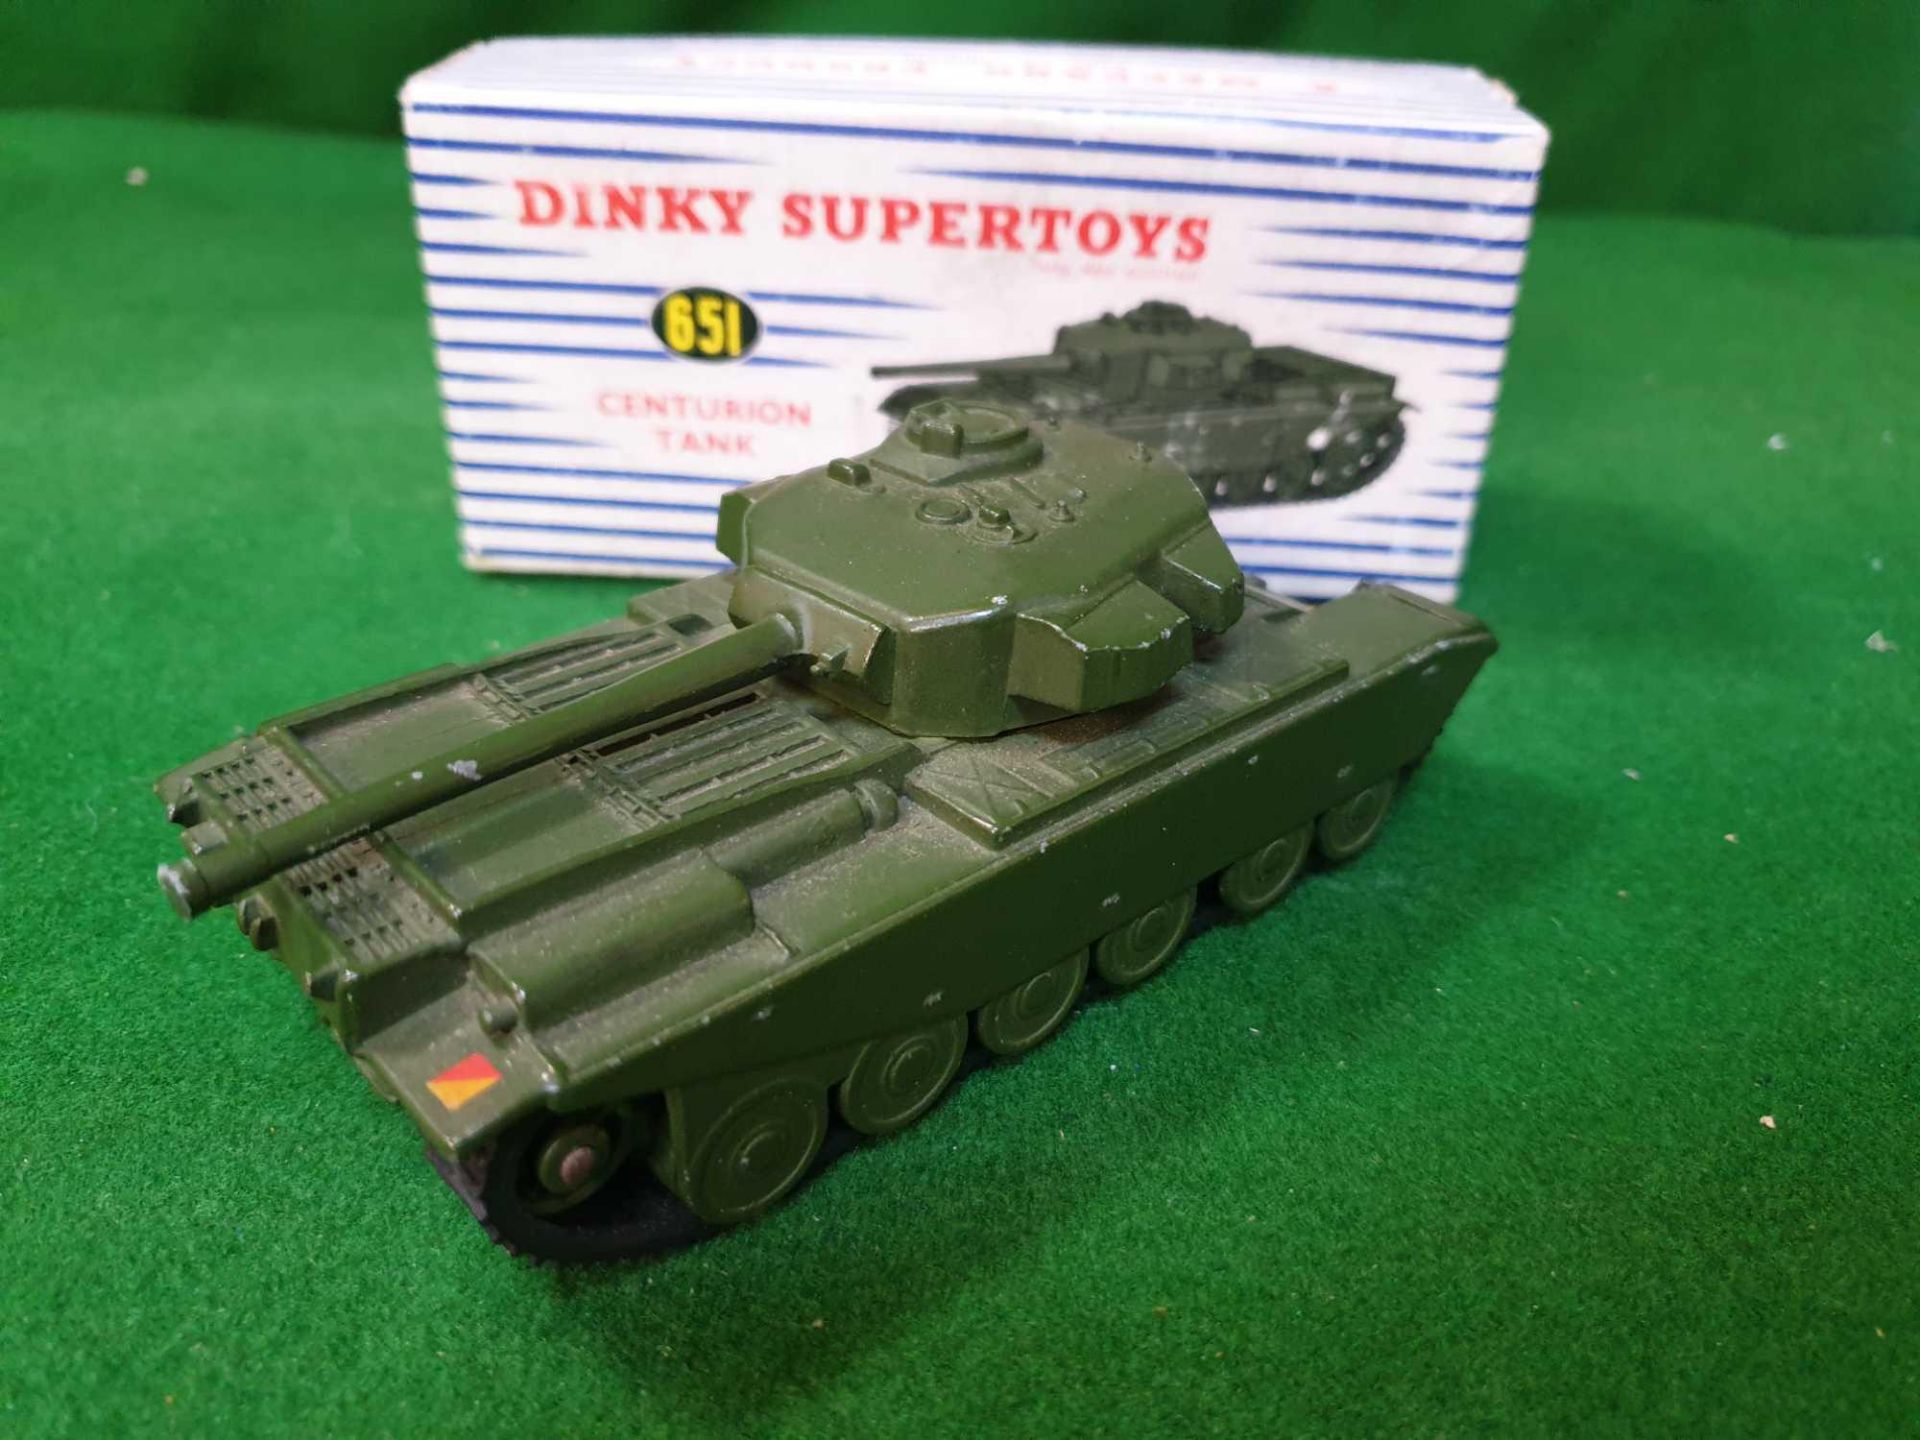 Dinky #651 Centurion Tank Green Rubber Tracks And Rotating Turret In Box 1954-1970 Near Mint In - Image 2 of 2